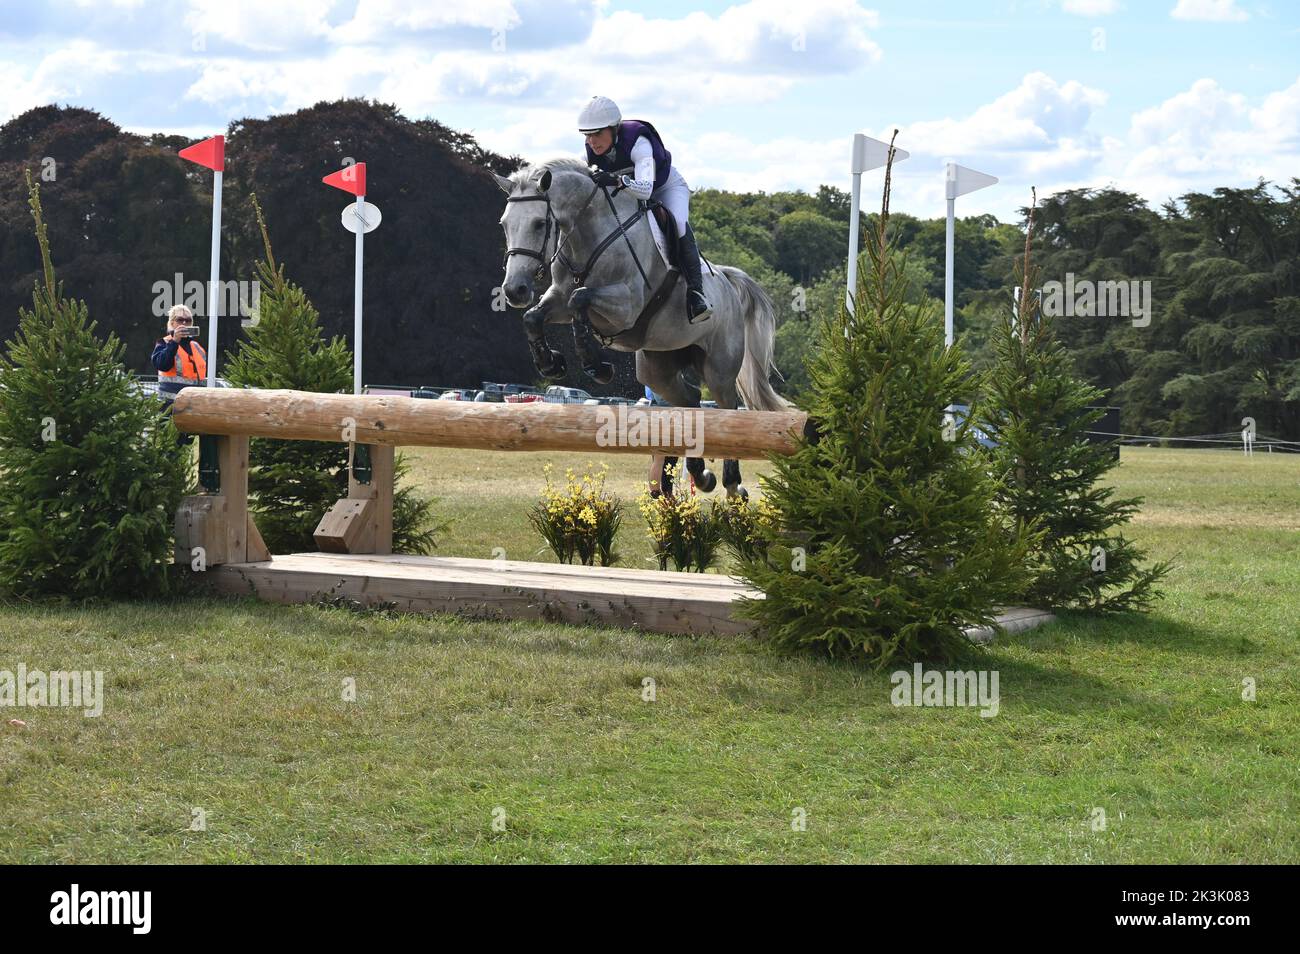 Georgie Campbell on Darcy De La Rose, cross country phase of the CCI4*-S compettion, Blenheim Palace International Horse Trials, Blenheim Palace, Wood Stock Photo